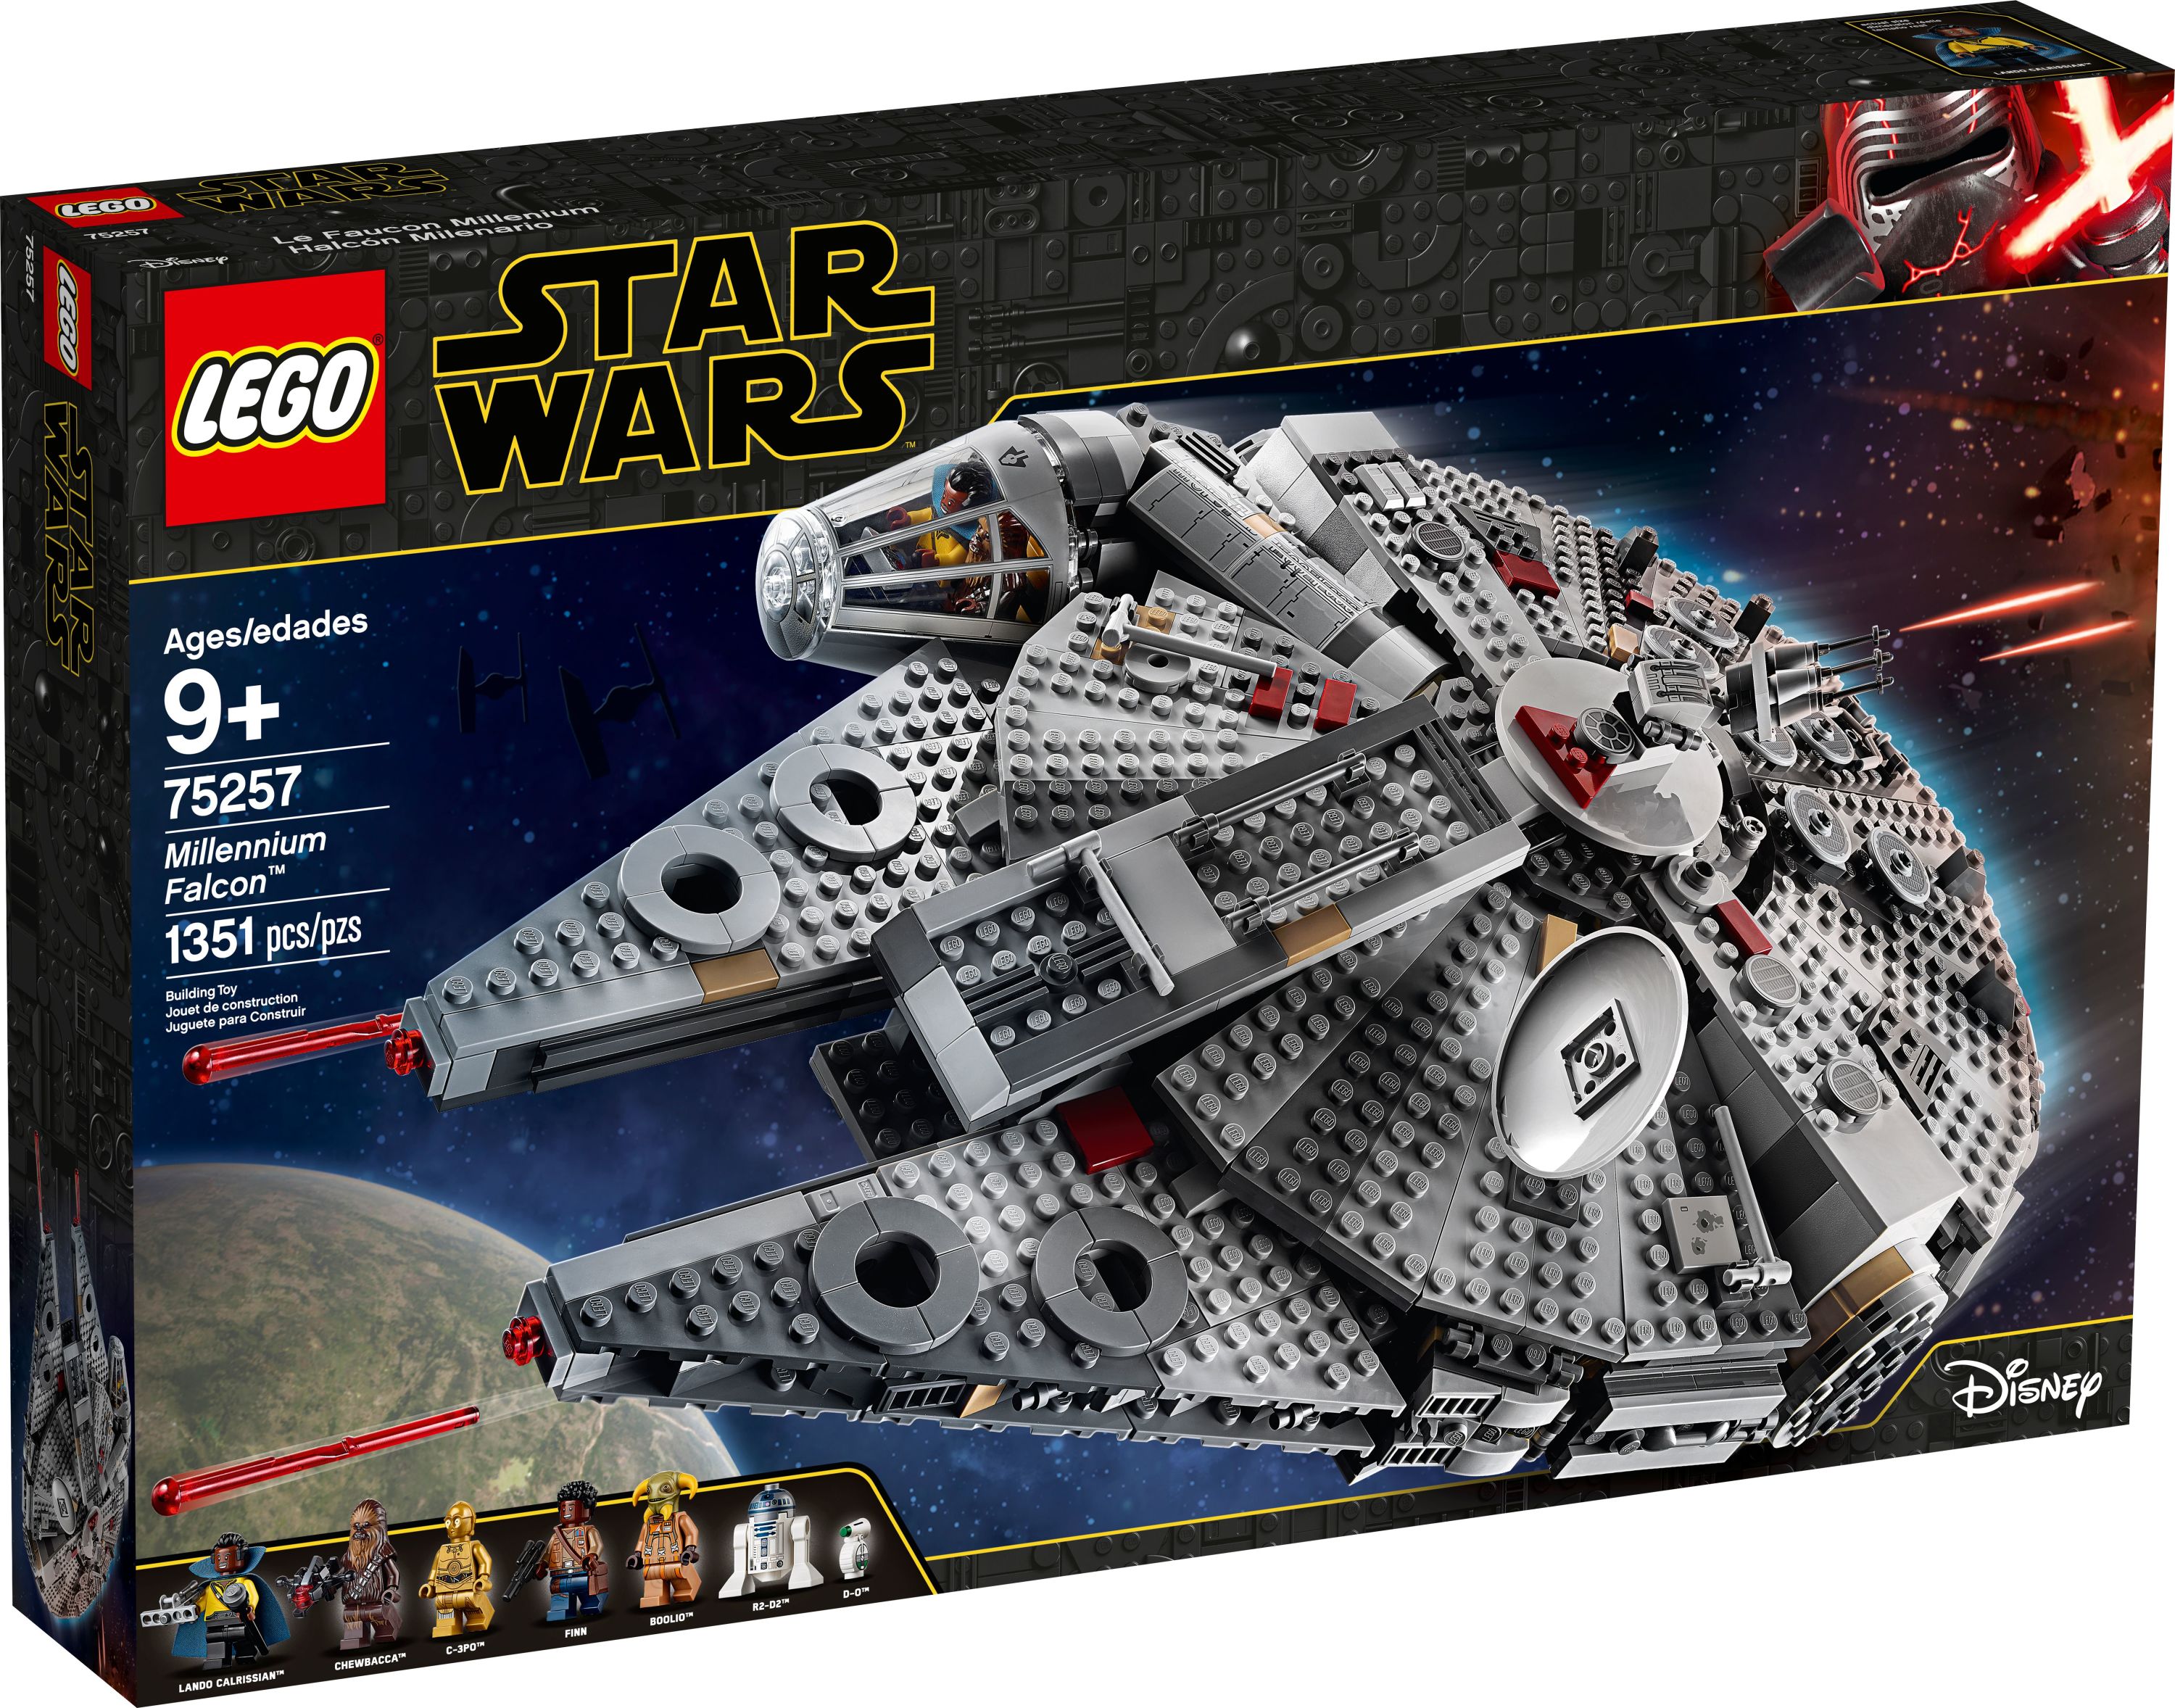 LEGO Star Wars Millennium Falcon 75257 Building Set - Starship Model with Finn, Chewbacca, Lando Calrissian, Boolio, C-3PO, R2-D2, and D-O Minifigures, The Rise of Skywalker Movie Collection - image 4 of 9